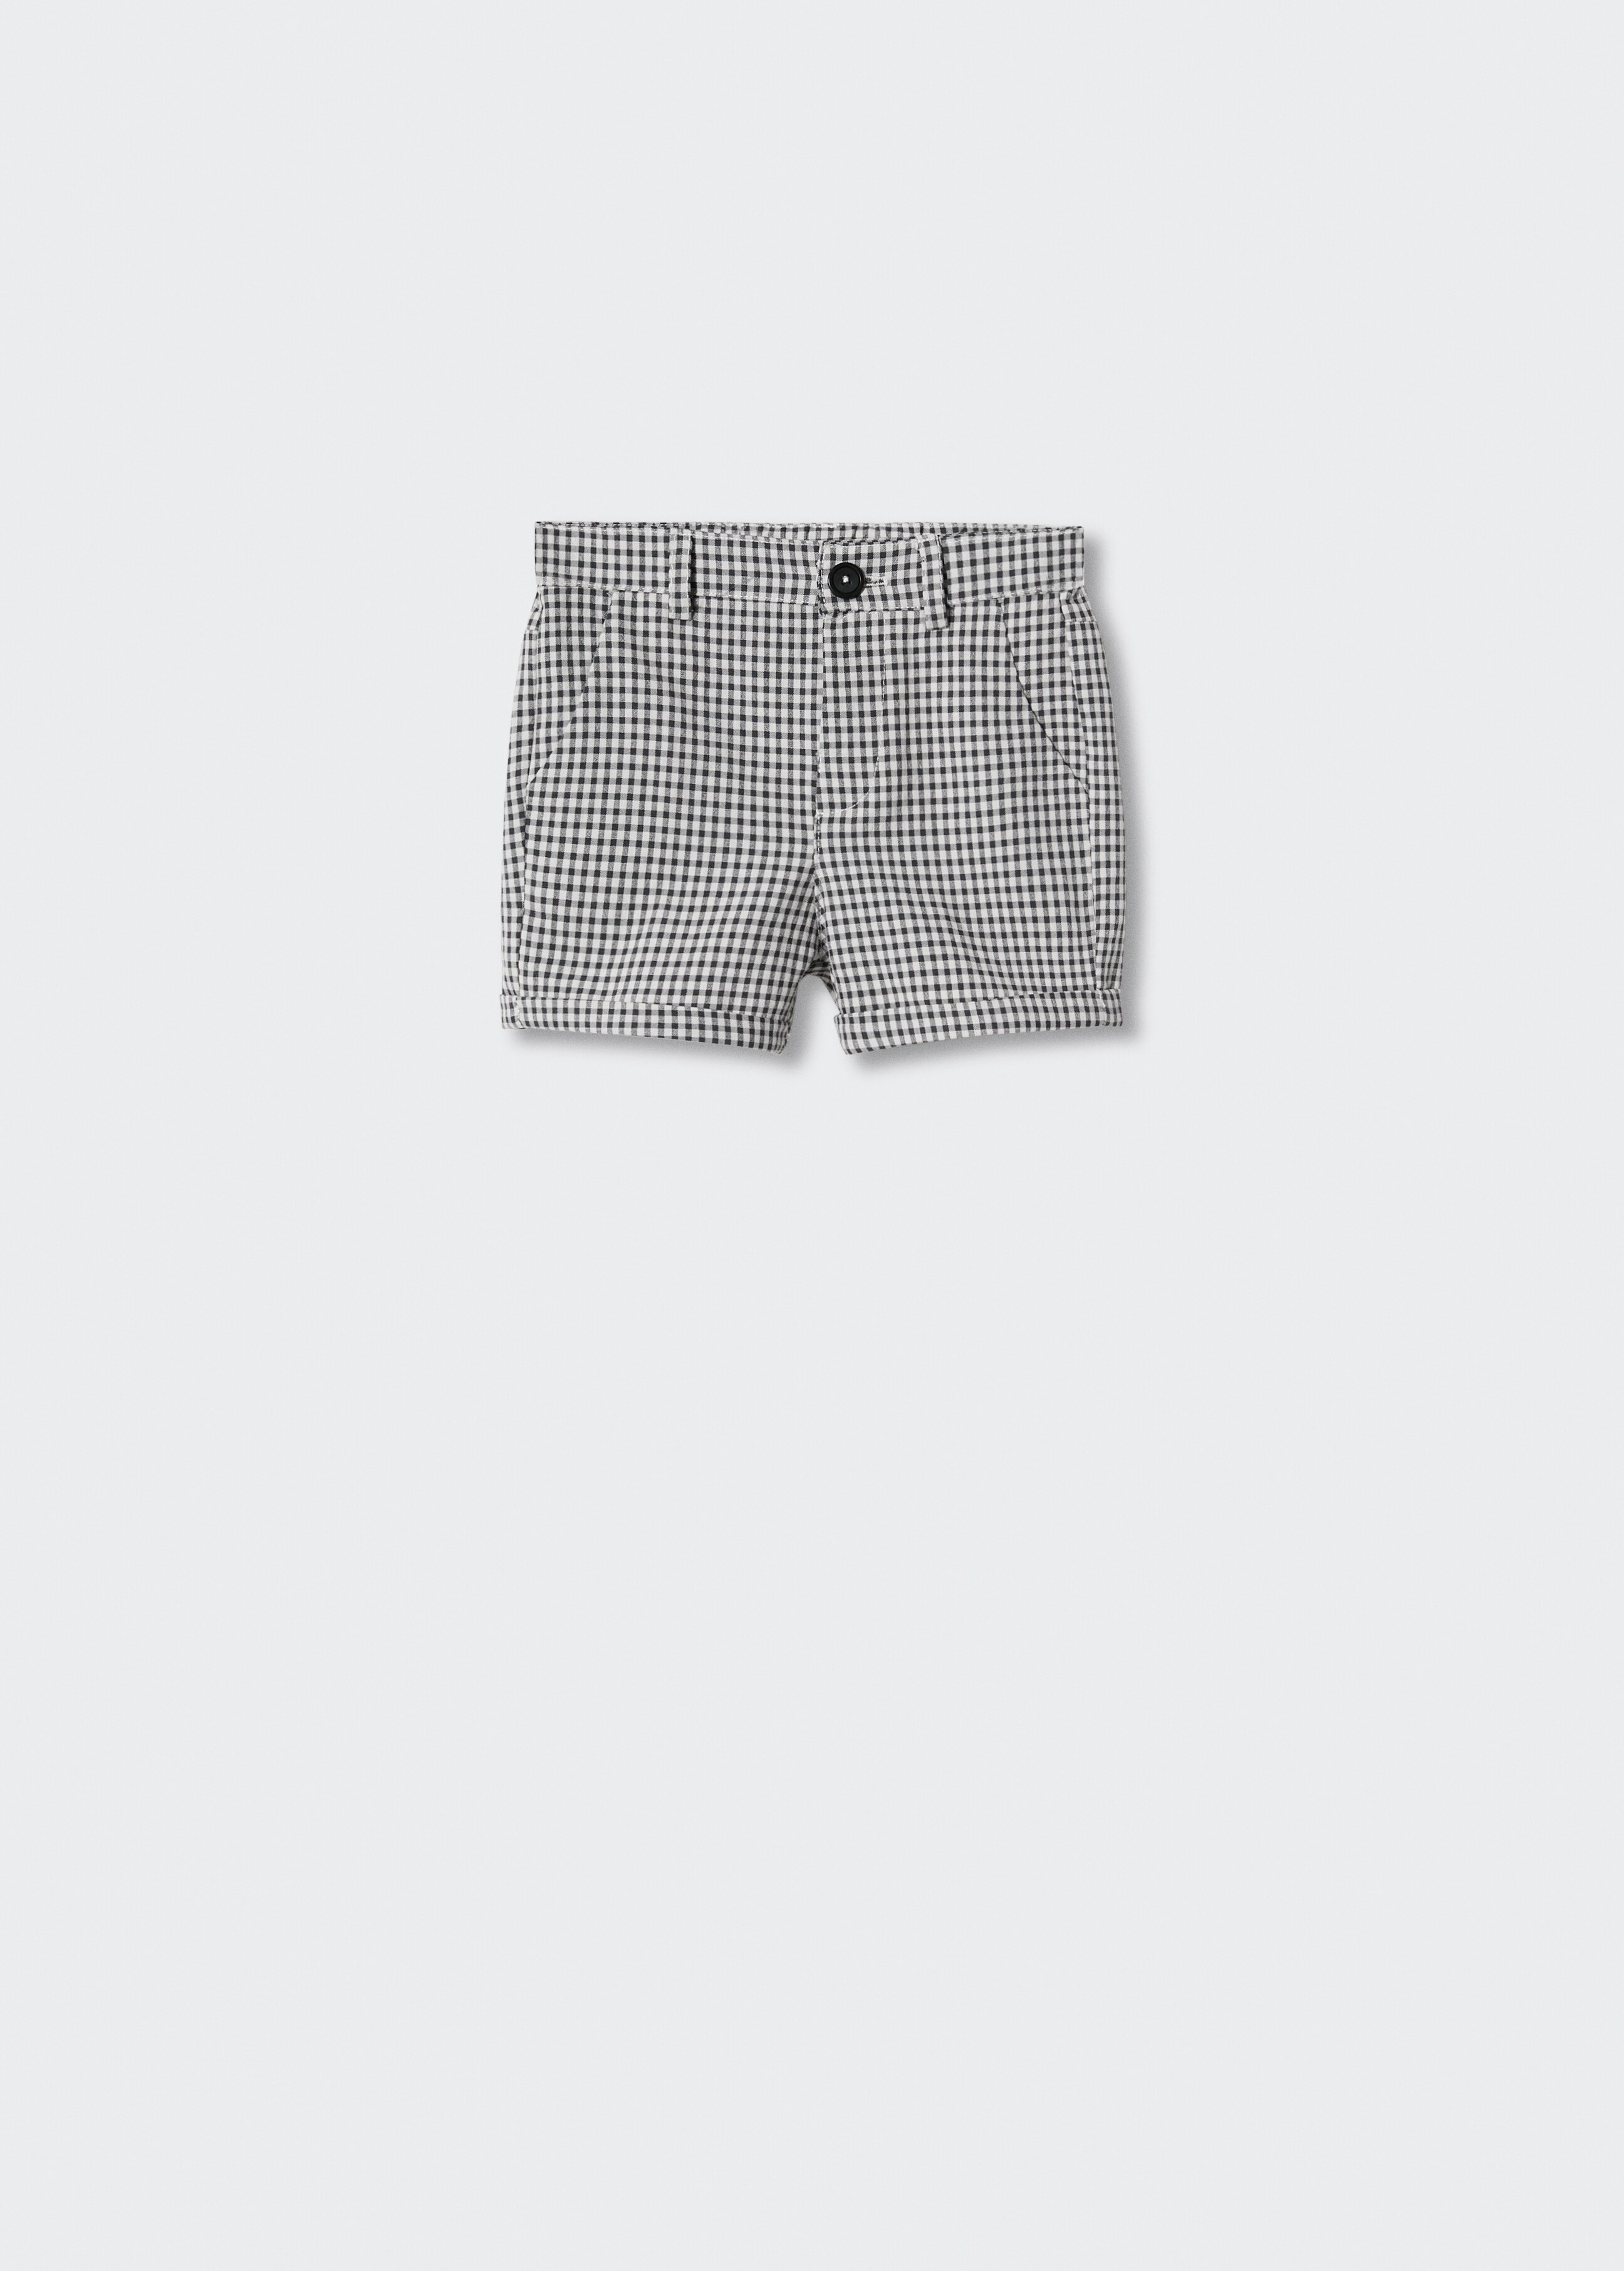 Gingham check shorts - Article without model